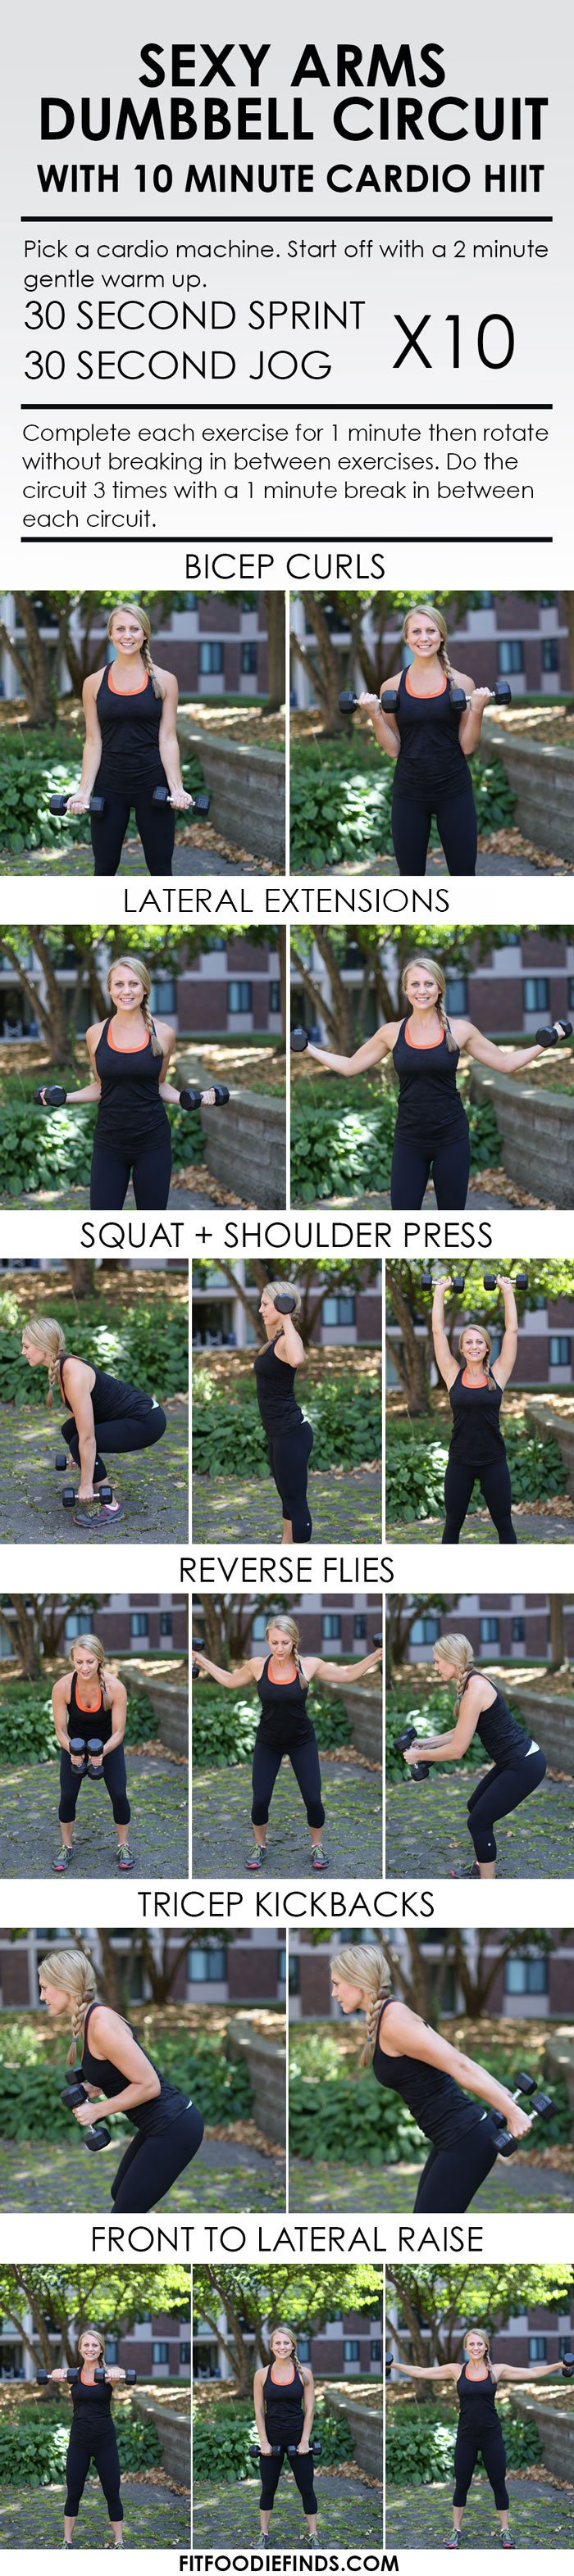 Sexy Arms Dumbbell Circuit Workout with 10 Minute Cardio HIIT #workout #fitness